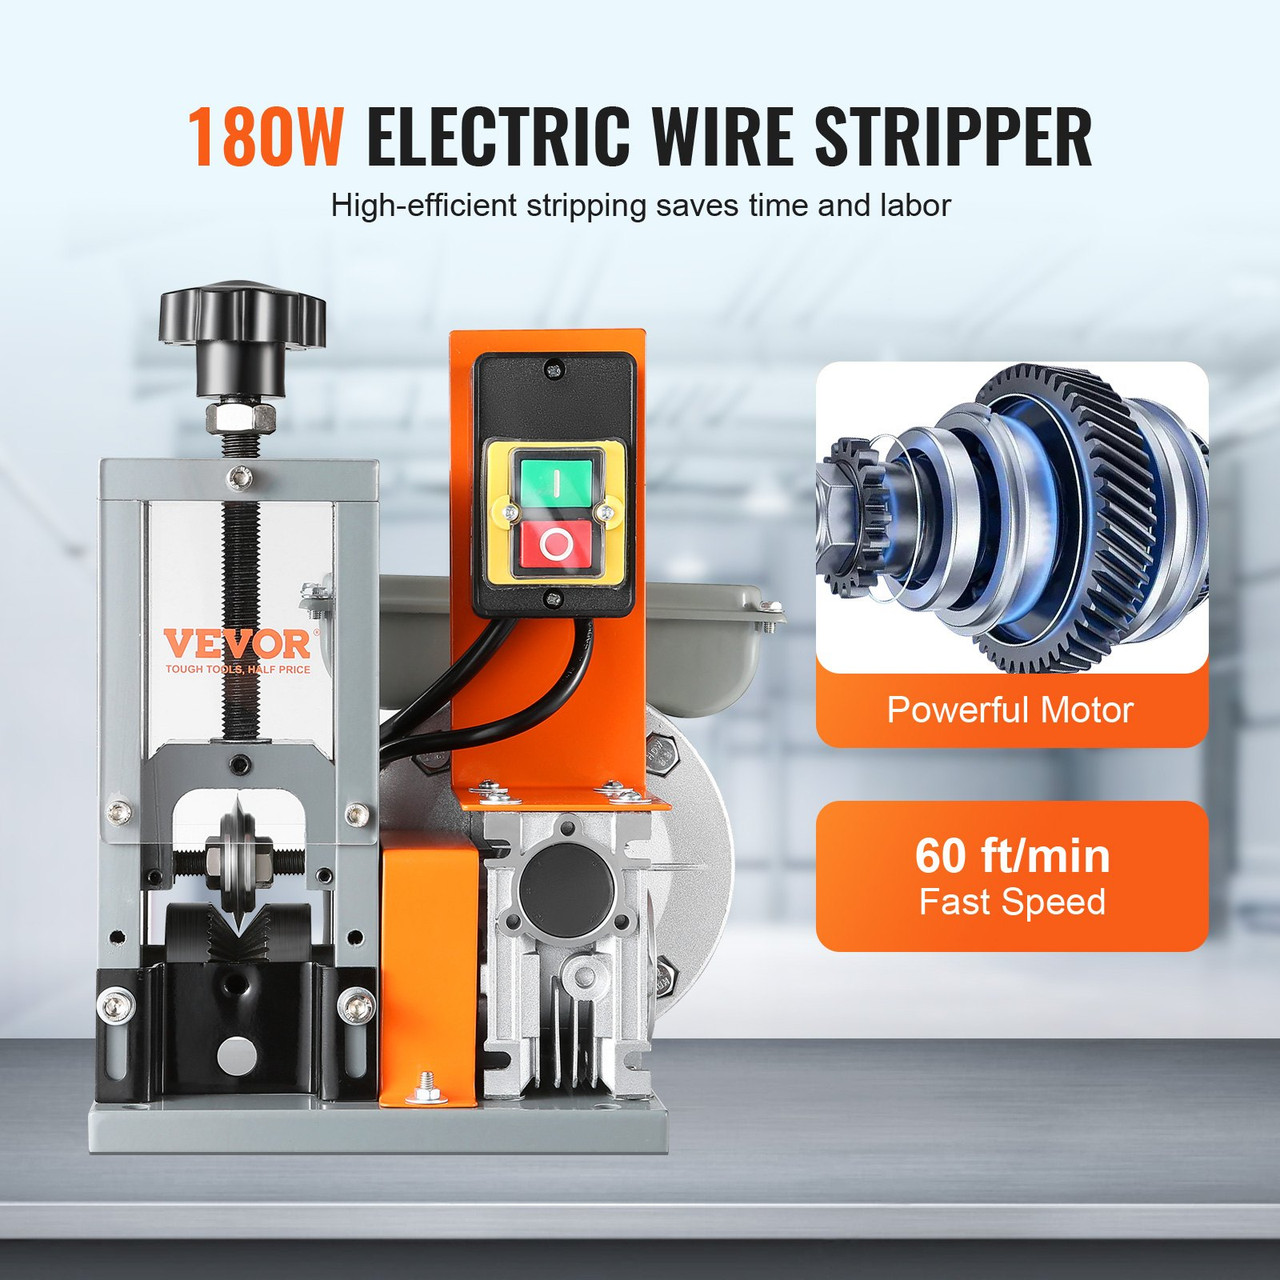 Automatic Wire Stripping Machine, 0.06''-0.98'' Electric Motorized Cable Stripper, 180 W, 60 ft/min Wire Peeler with Visible Stripping Depth Reference, for Scrap Copper Recycling